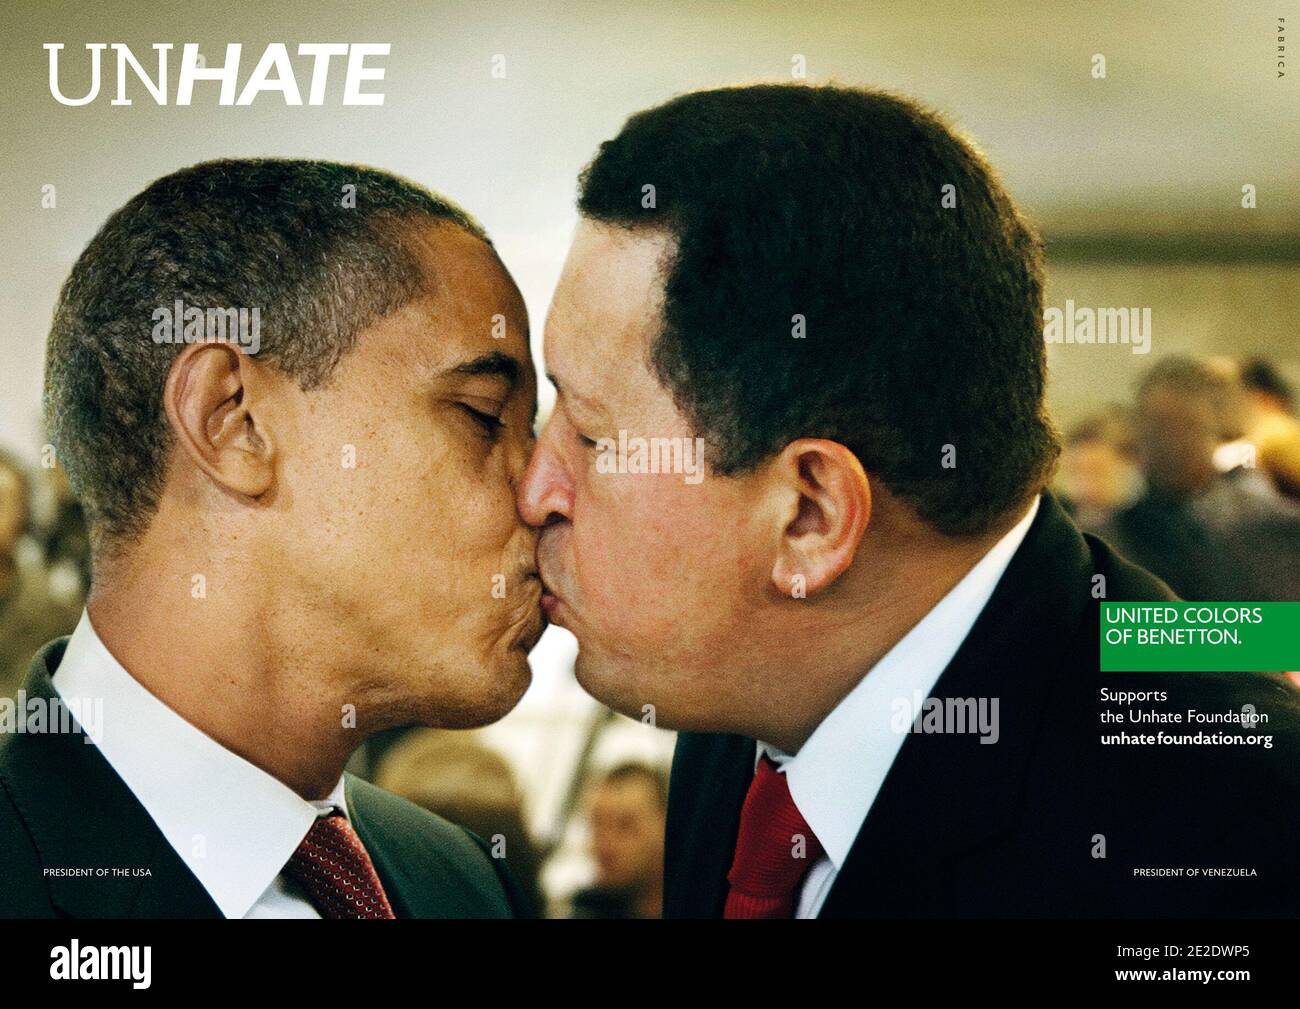 Images from United Colors of Benetton's Unhate campaign. The campaign  "invites the leaders of the world to combat the 'culture of hatred'. The  campiang includes mocked up images, one of which is